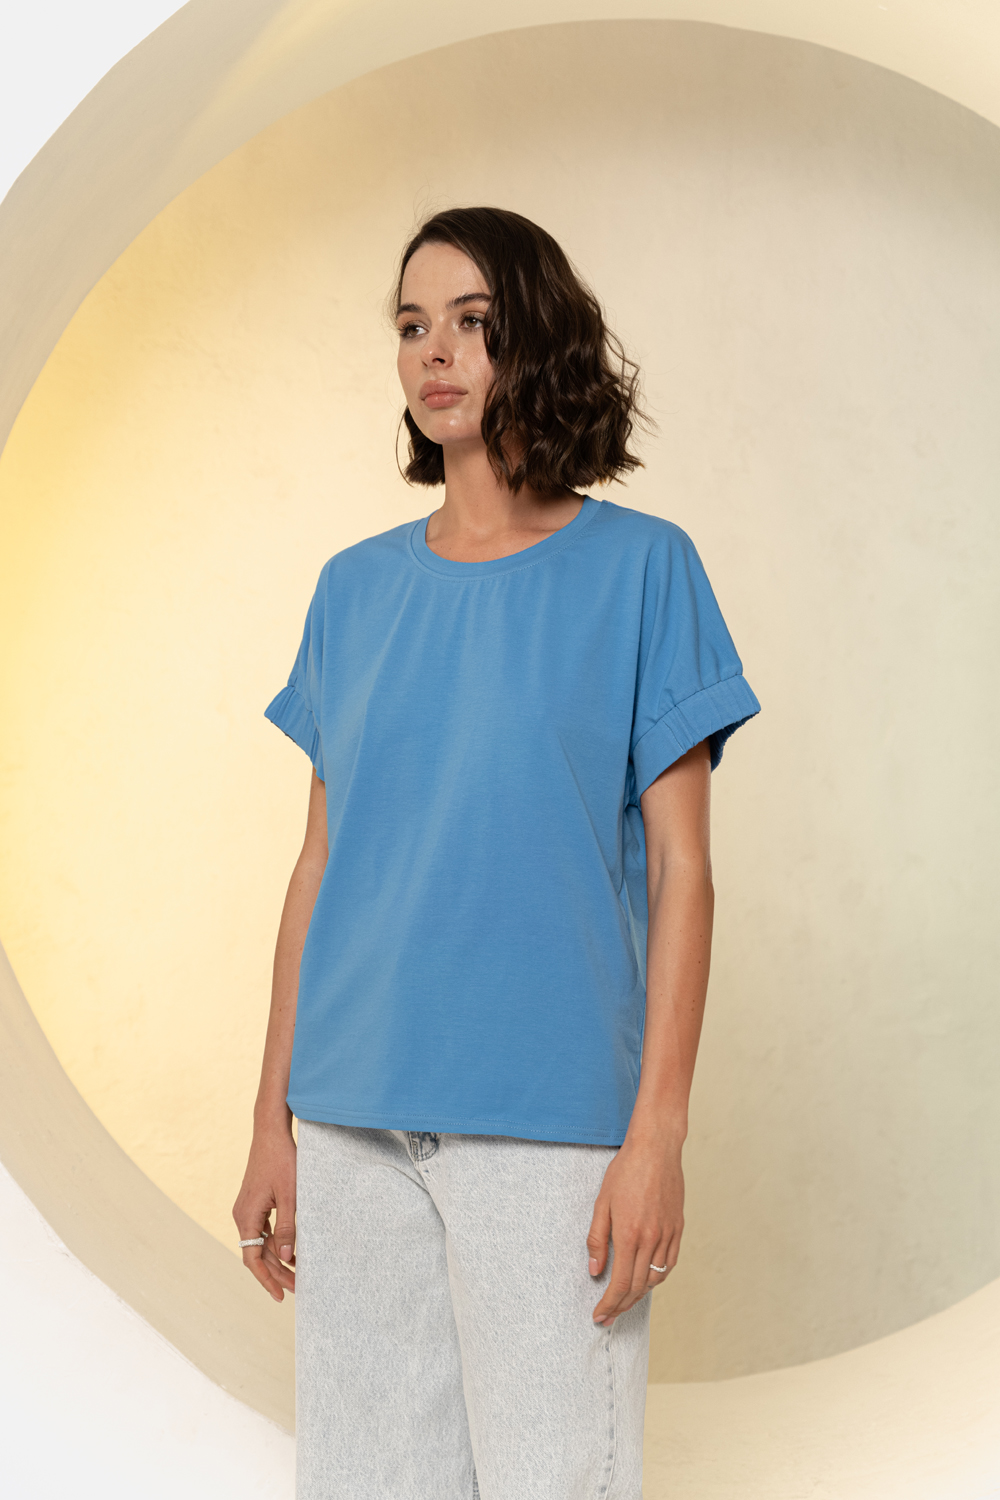 Blue T-shirt with round neck